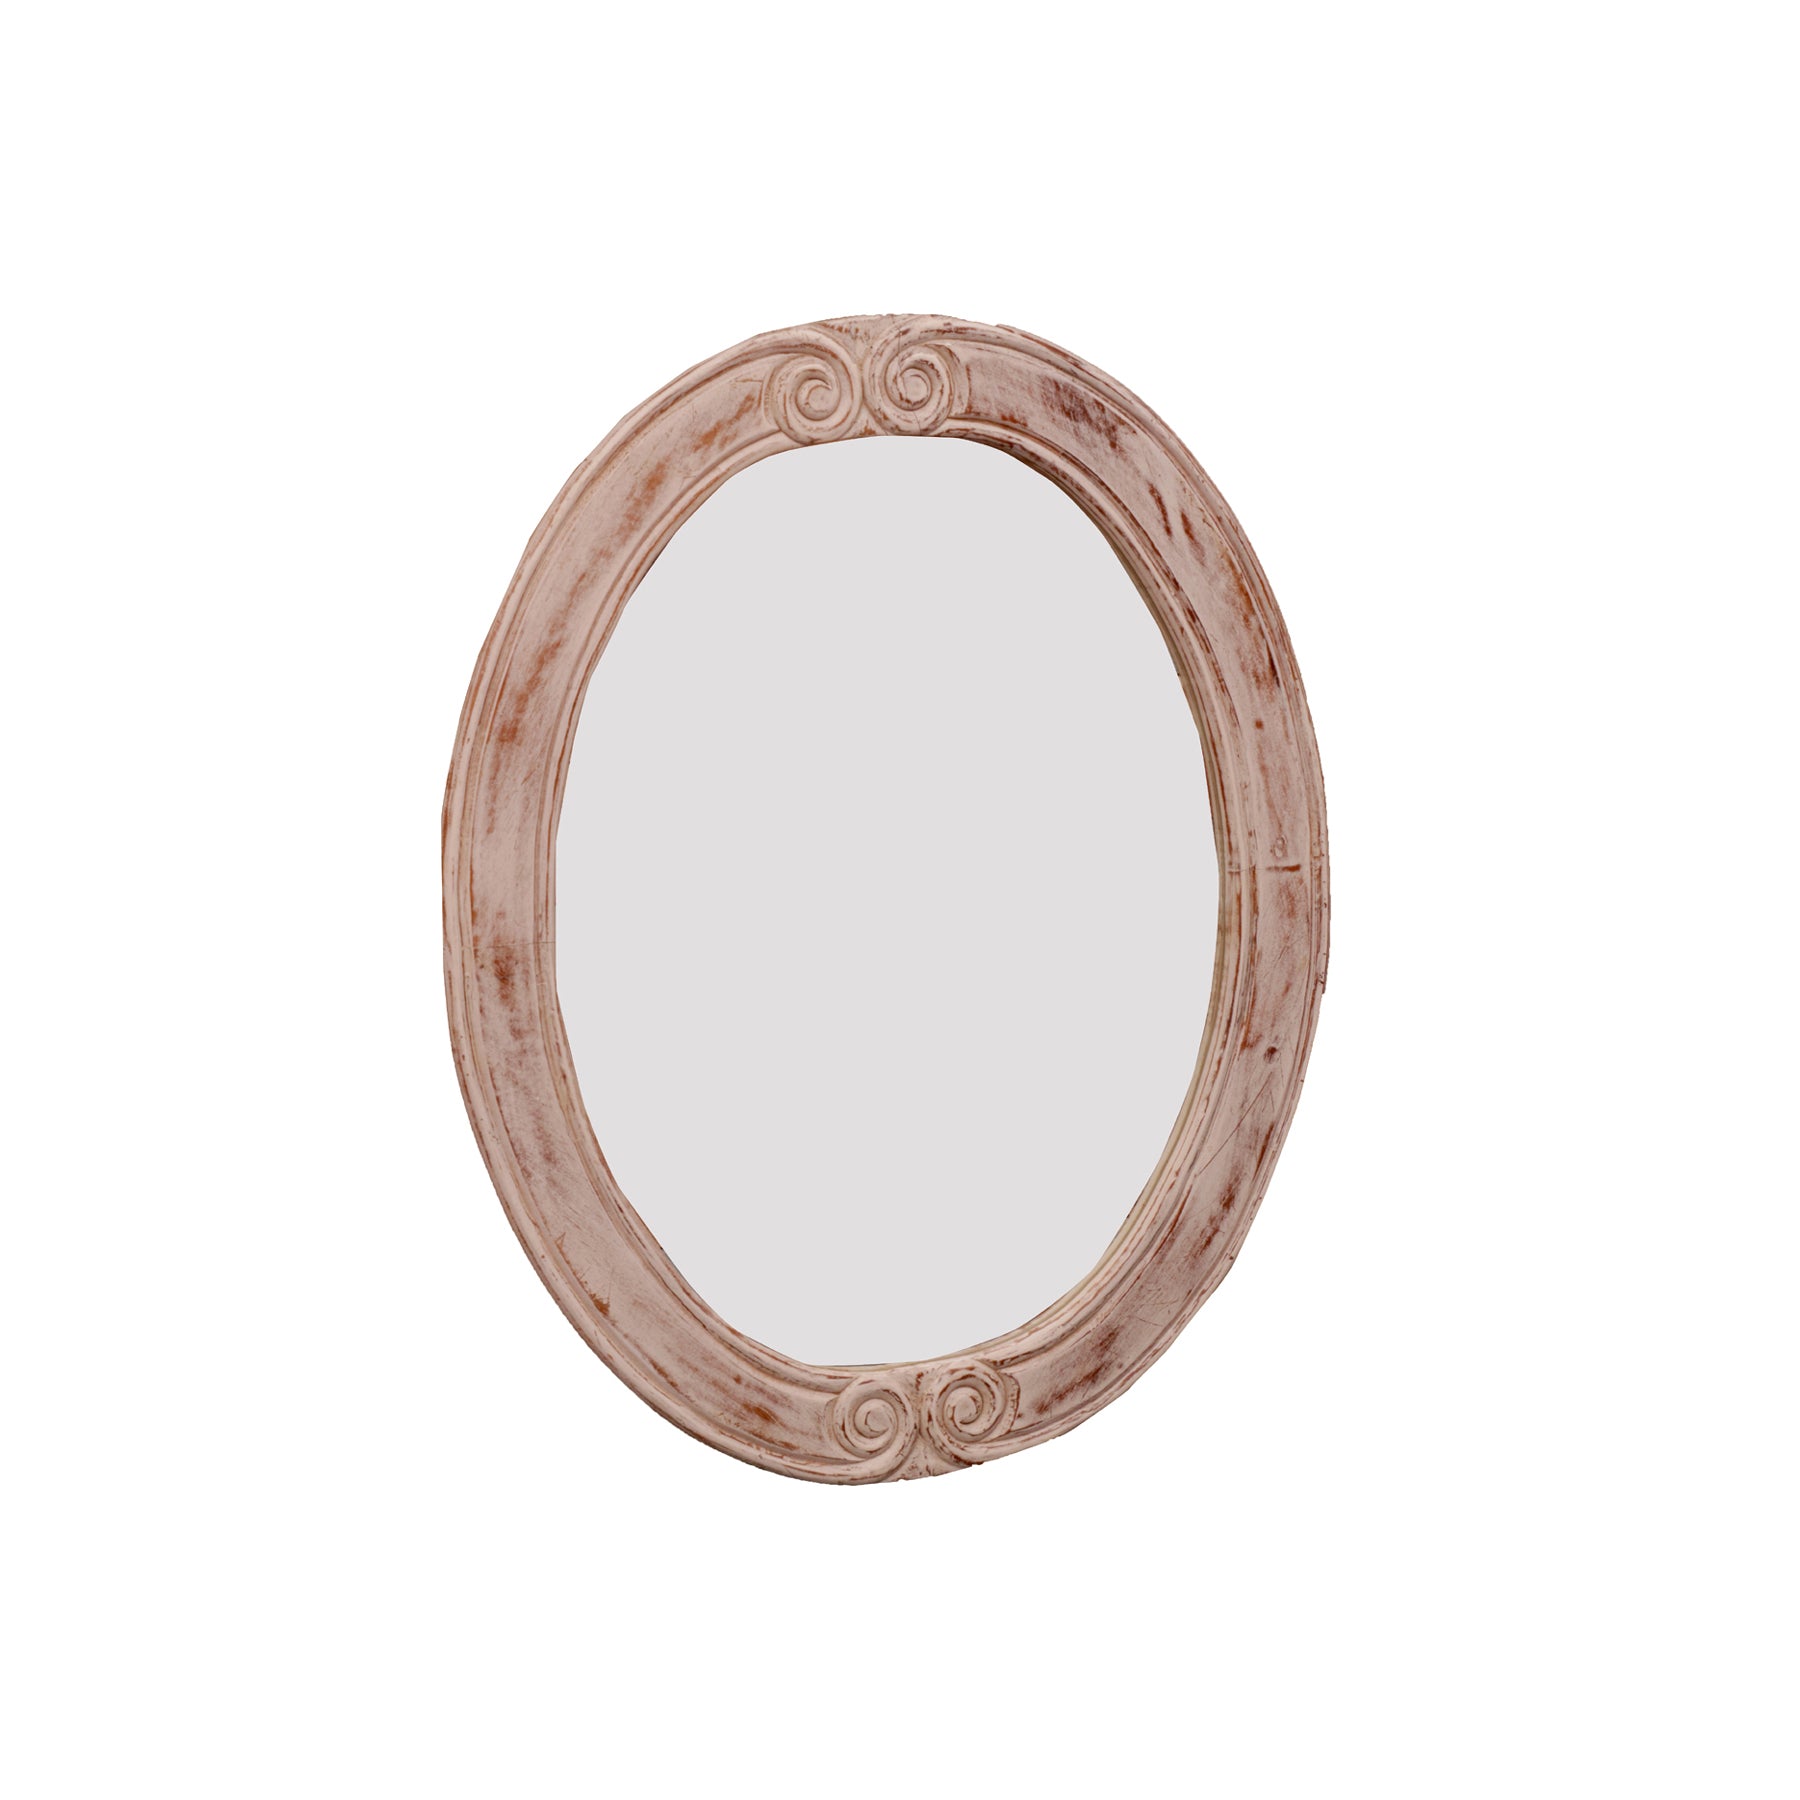 Oval Rustic Hanging Mirror Mirror